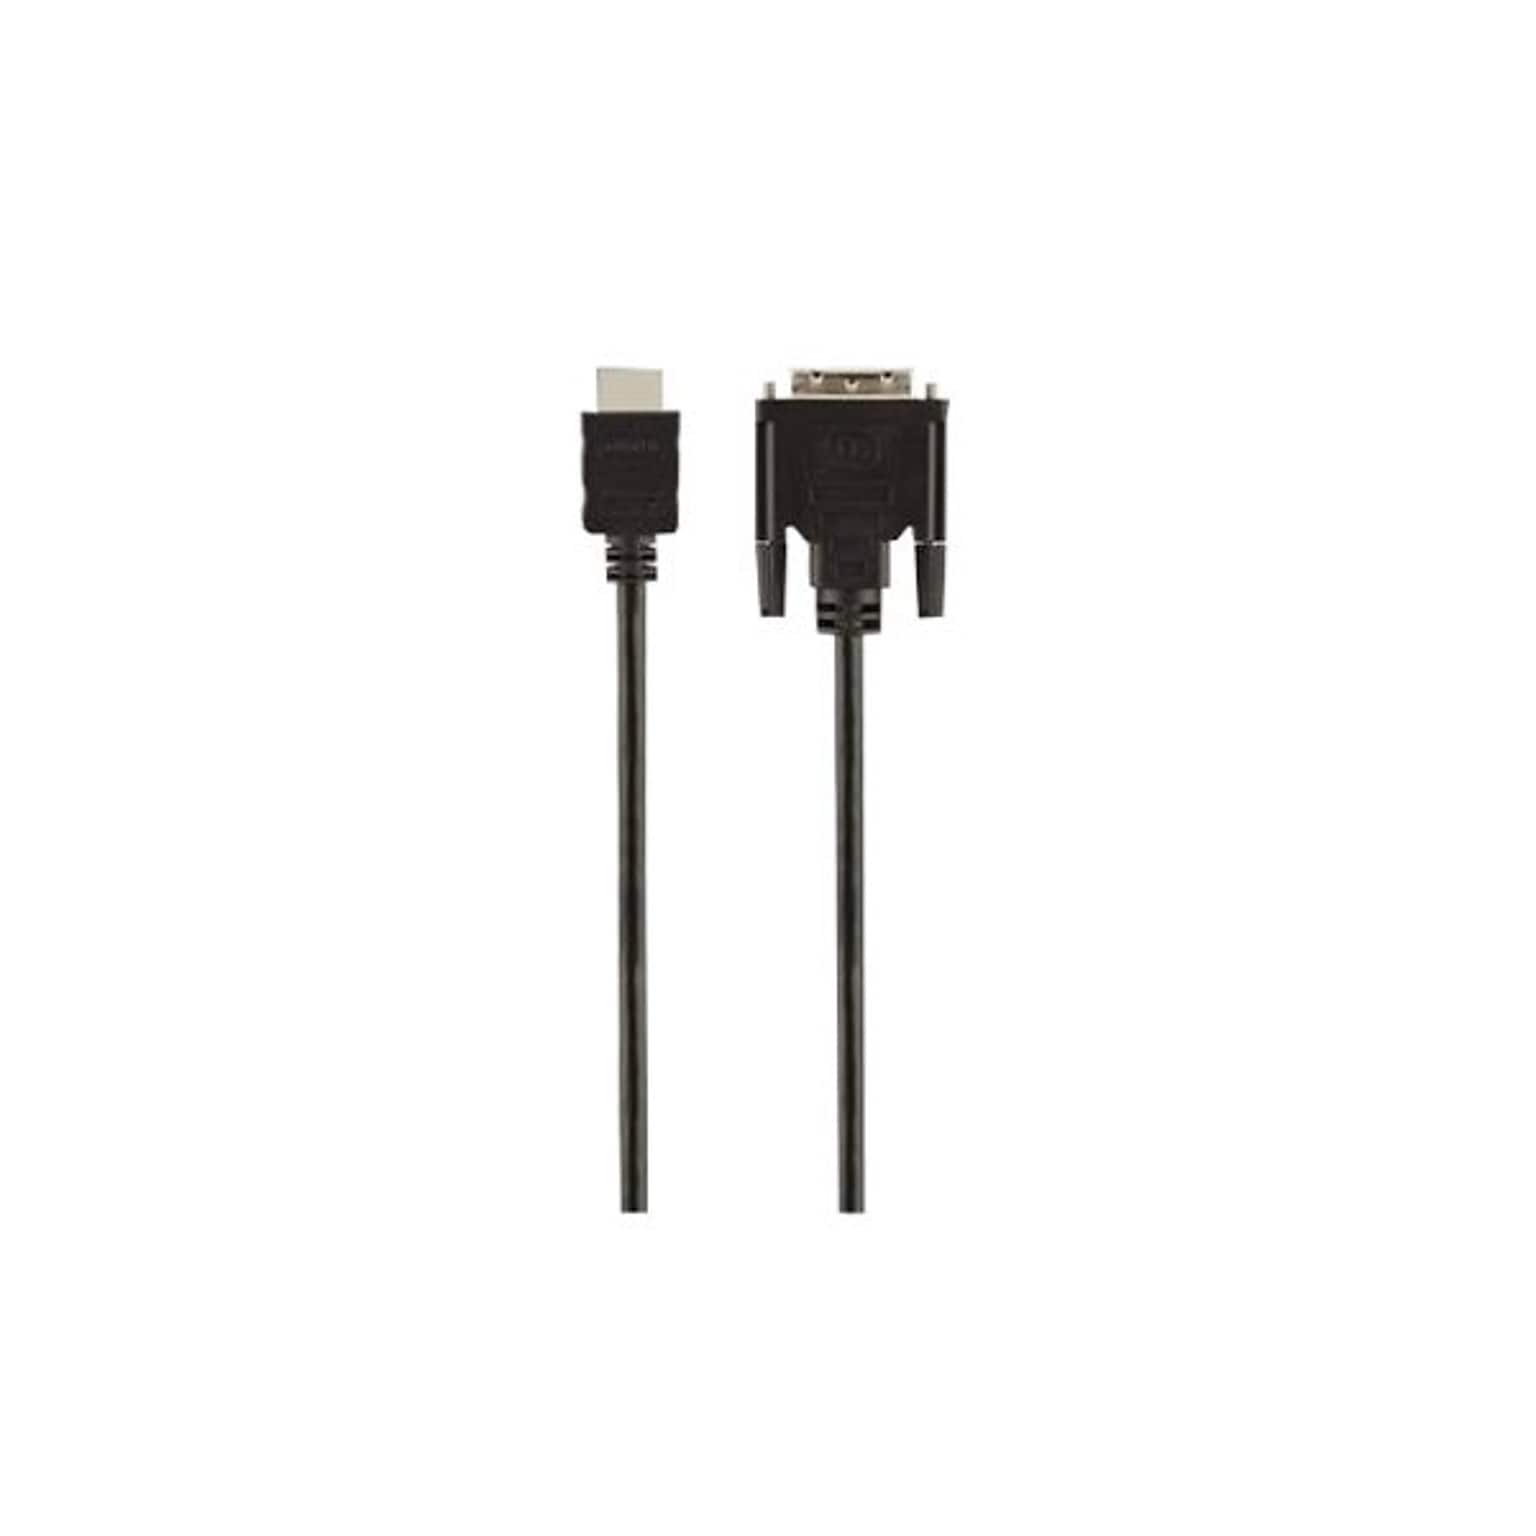 Belkin™ 3 HDMI to DVI Video Cable